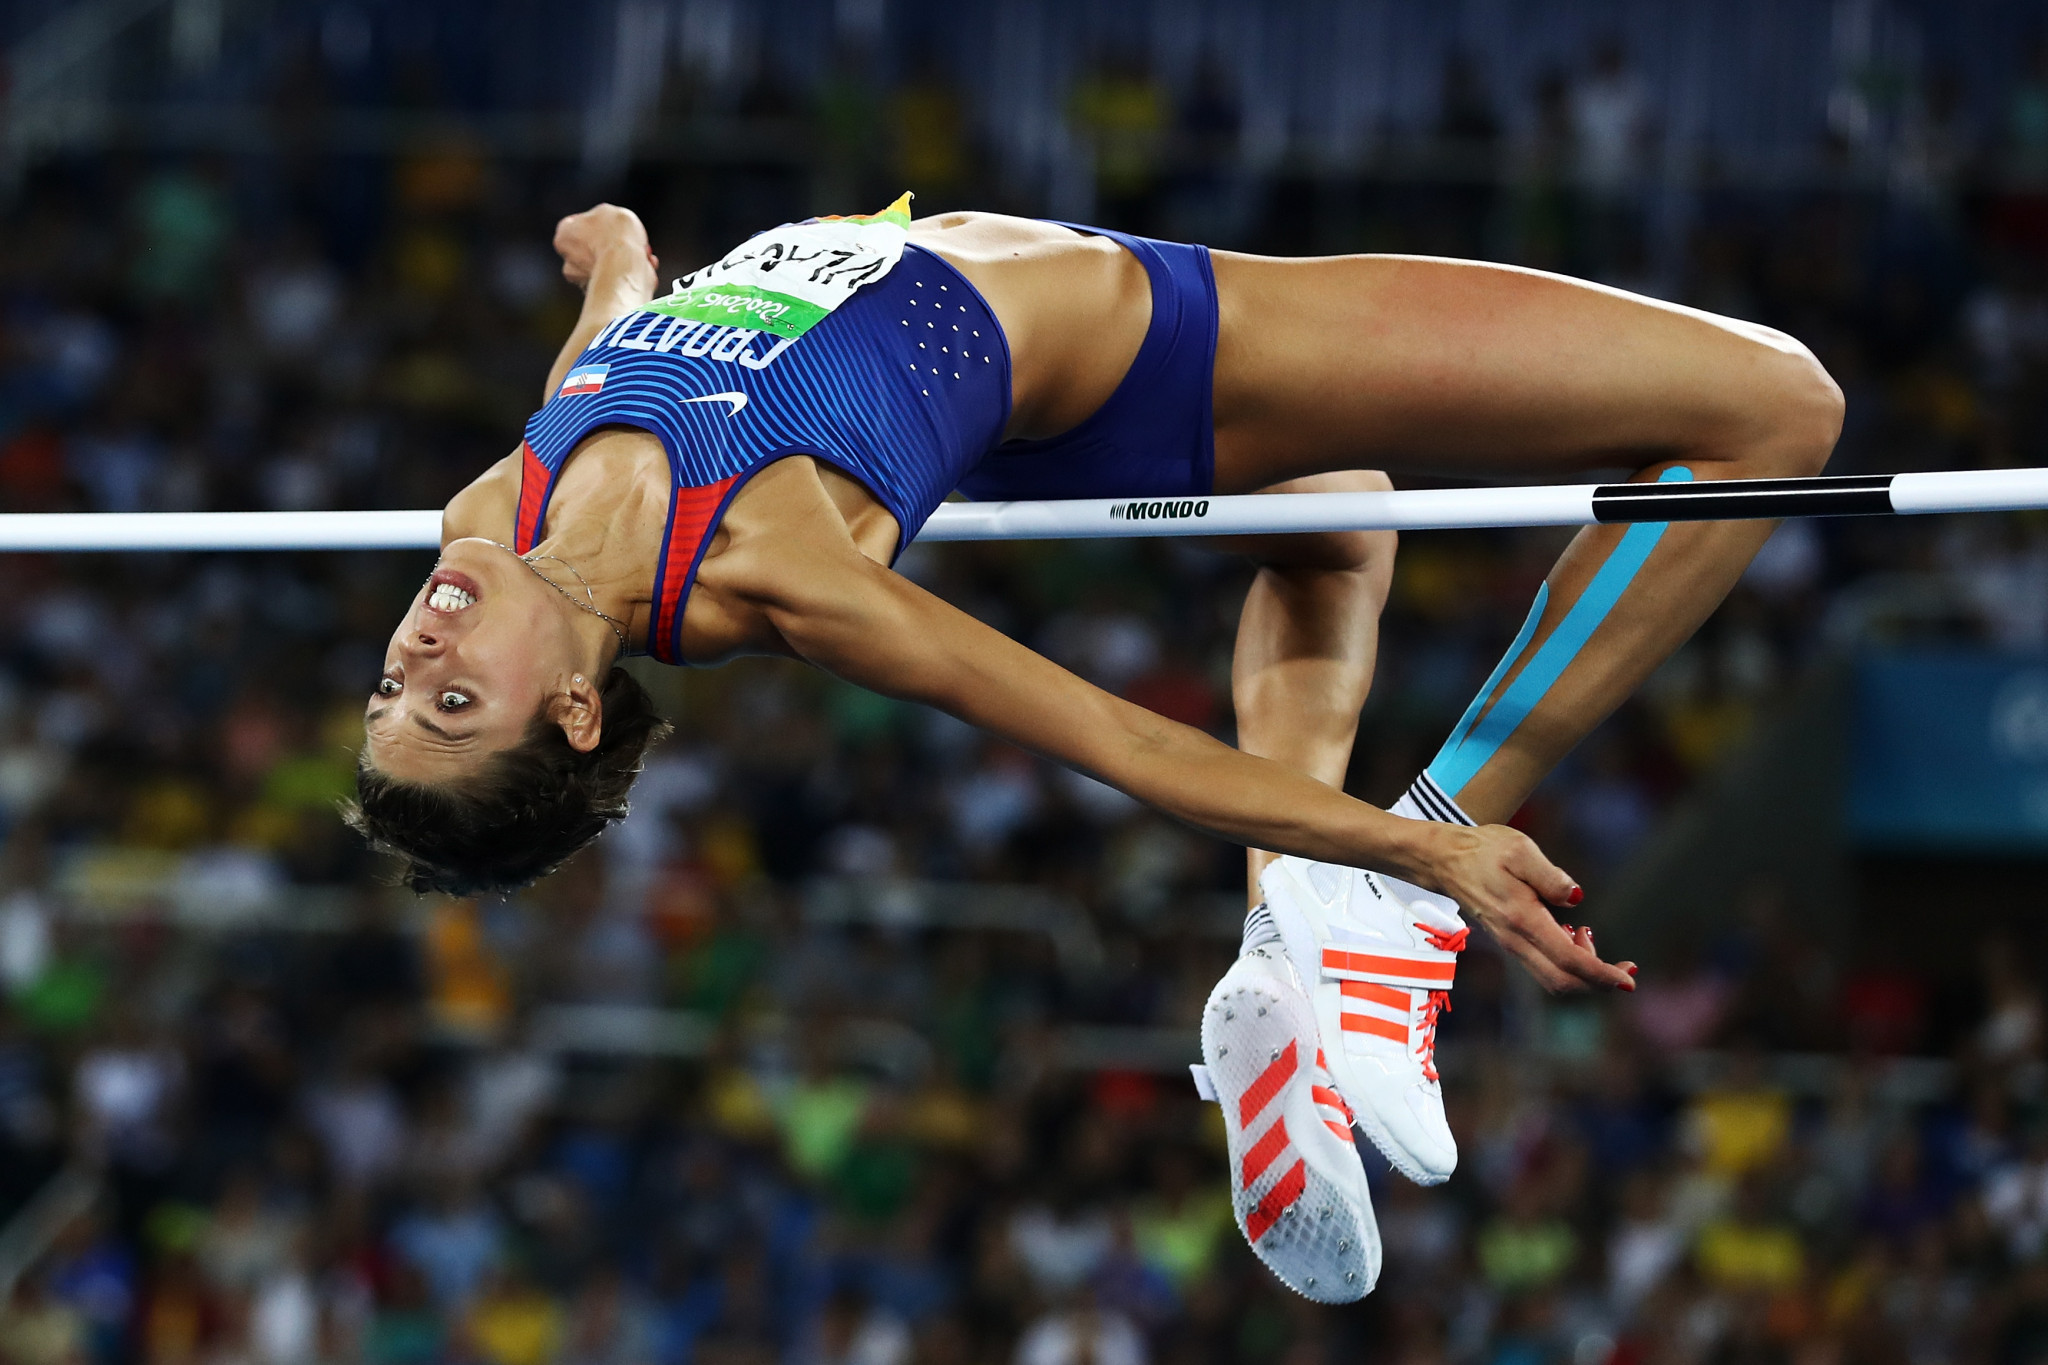 Blanka Vlasic won bronze at Rio 2016, eight years after earning Olympic silver ©Getty Images